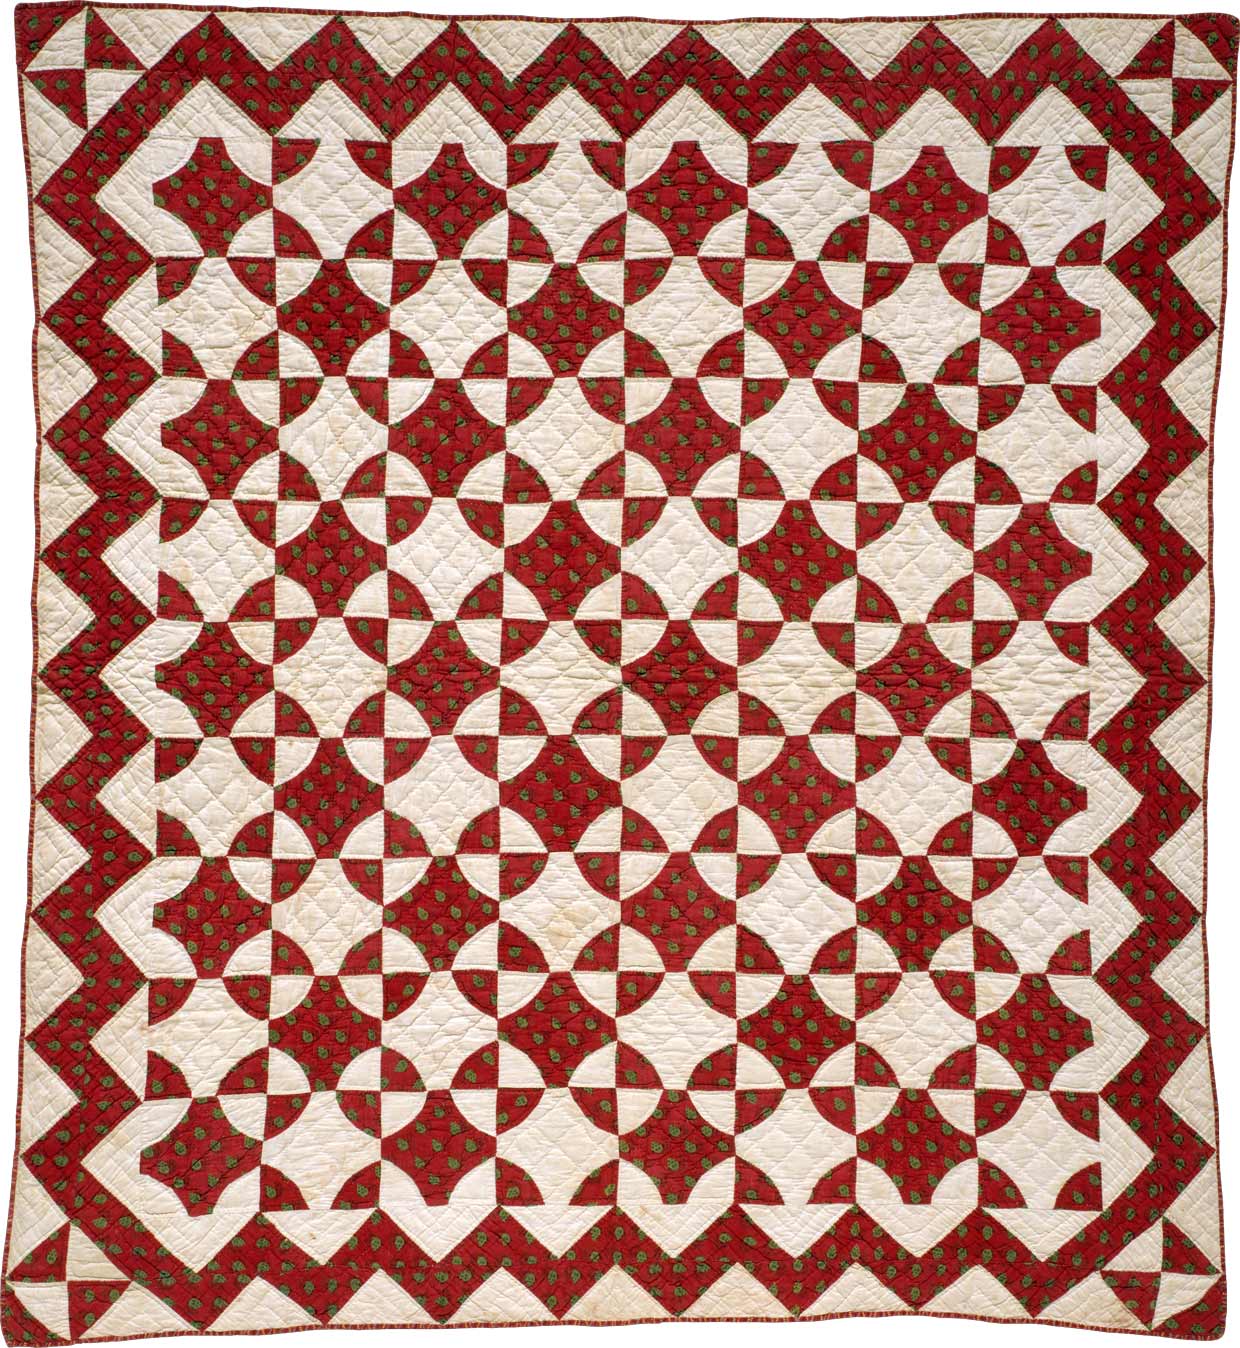 A quilt with a highly-regular geometirc red and white pattern.